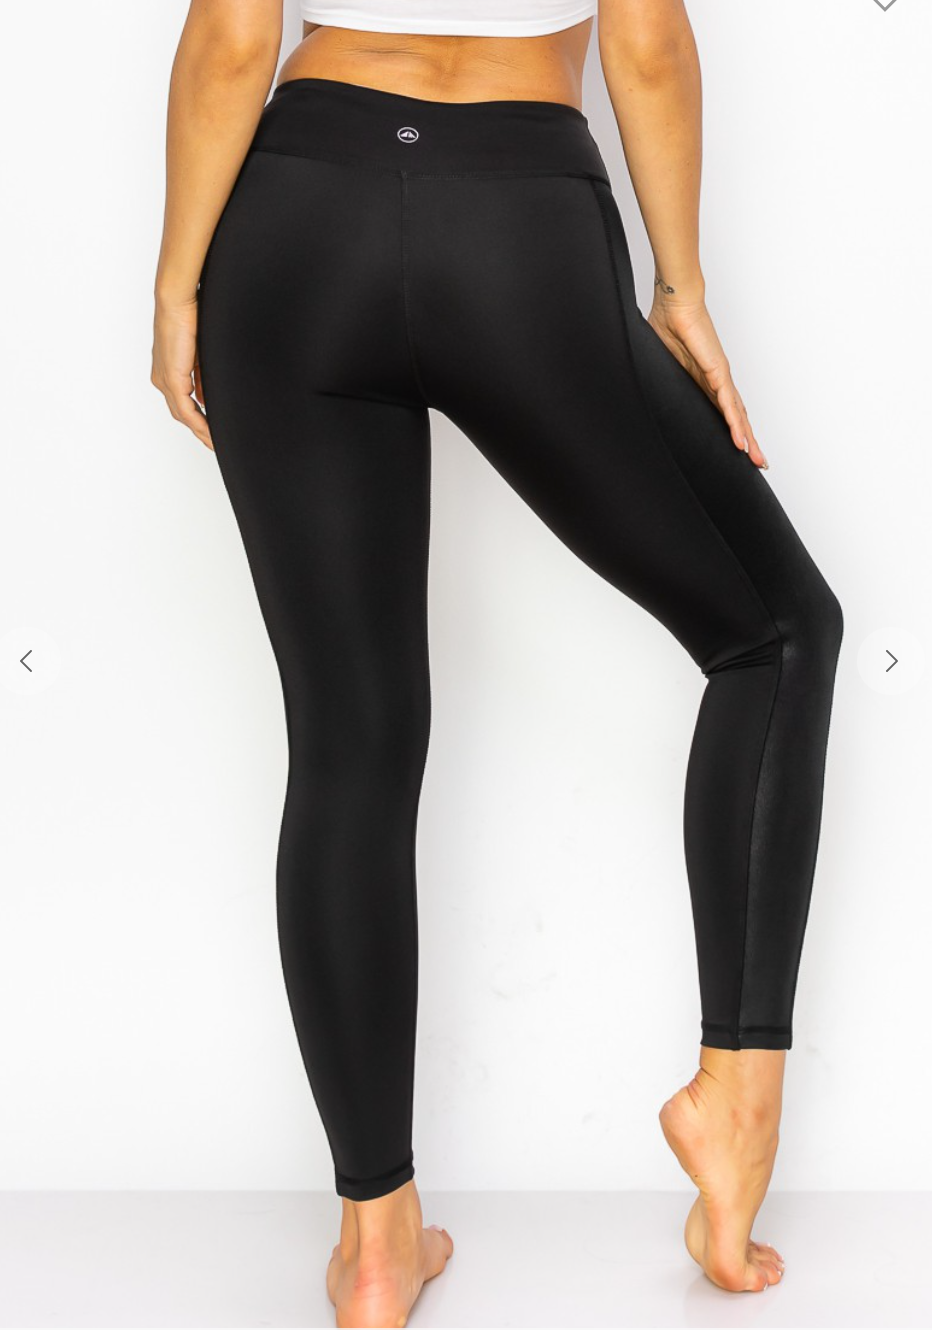 Brushed DTY & PU solid mixed leggings